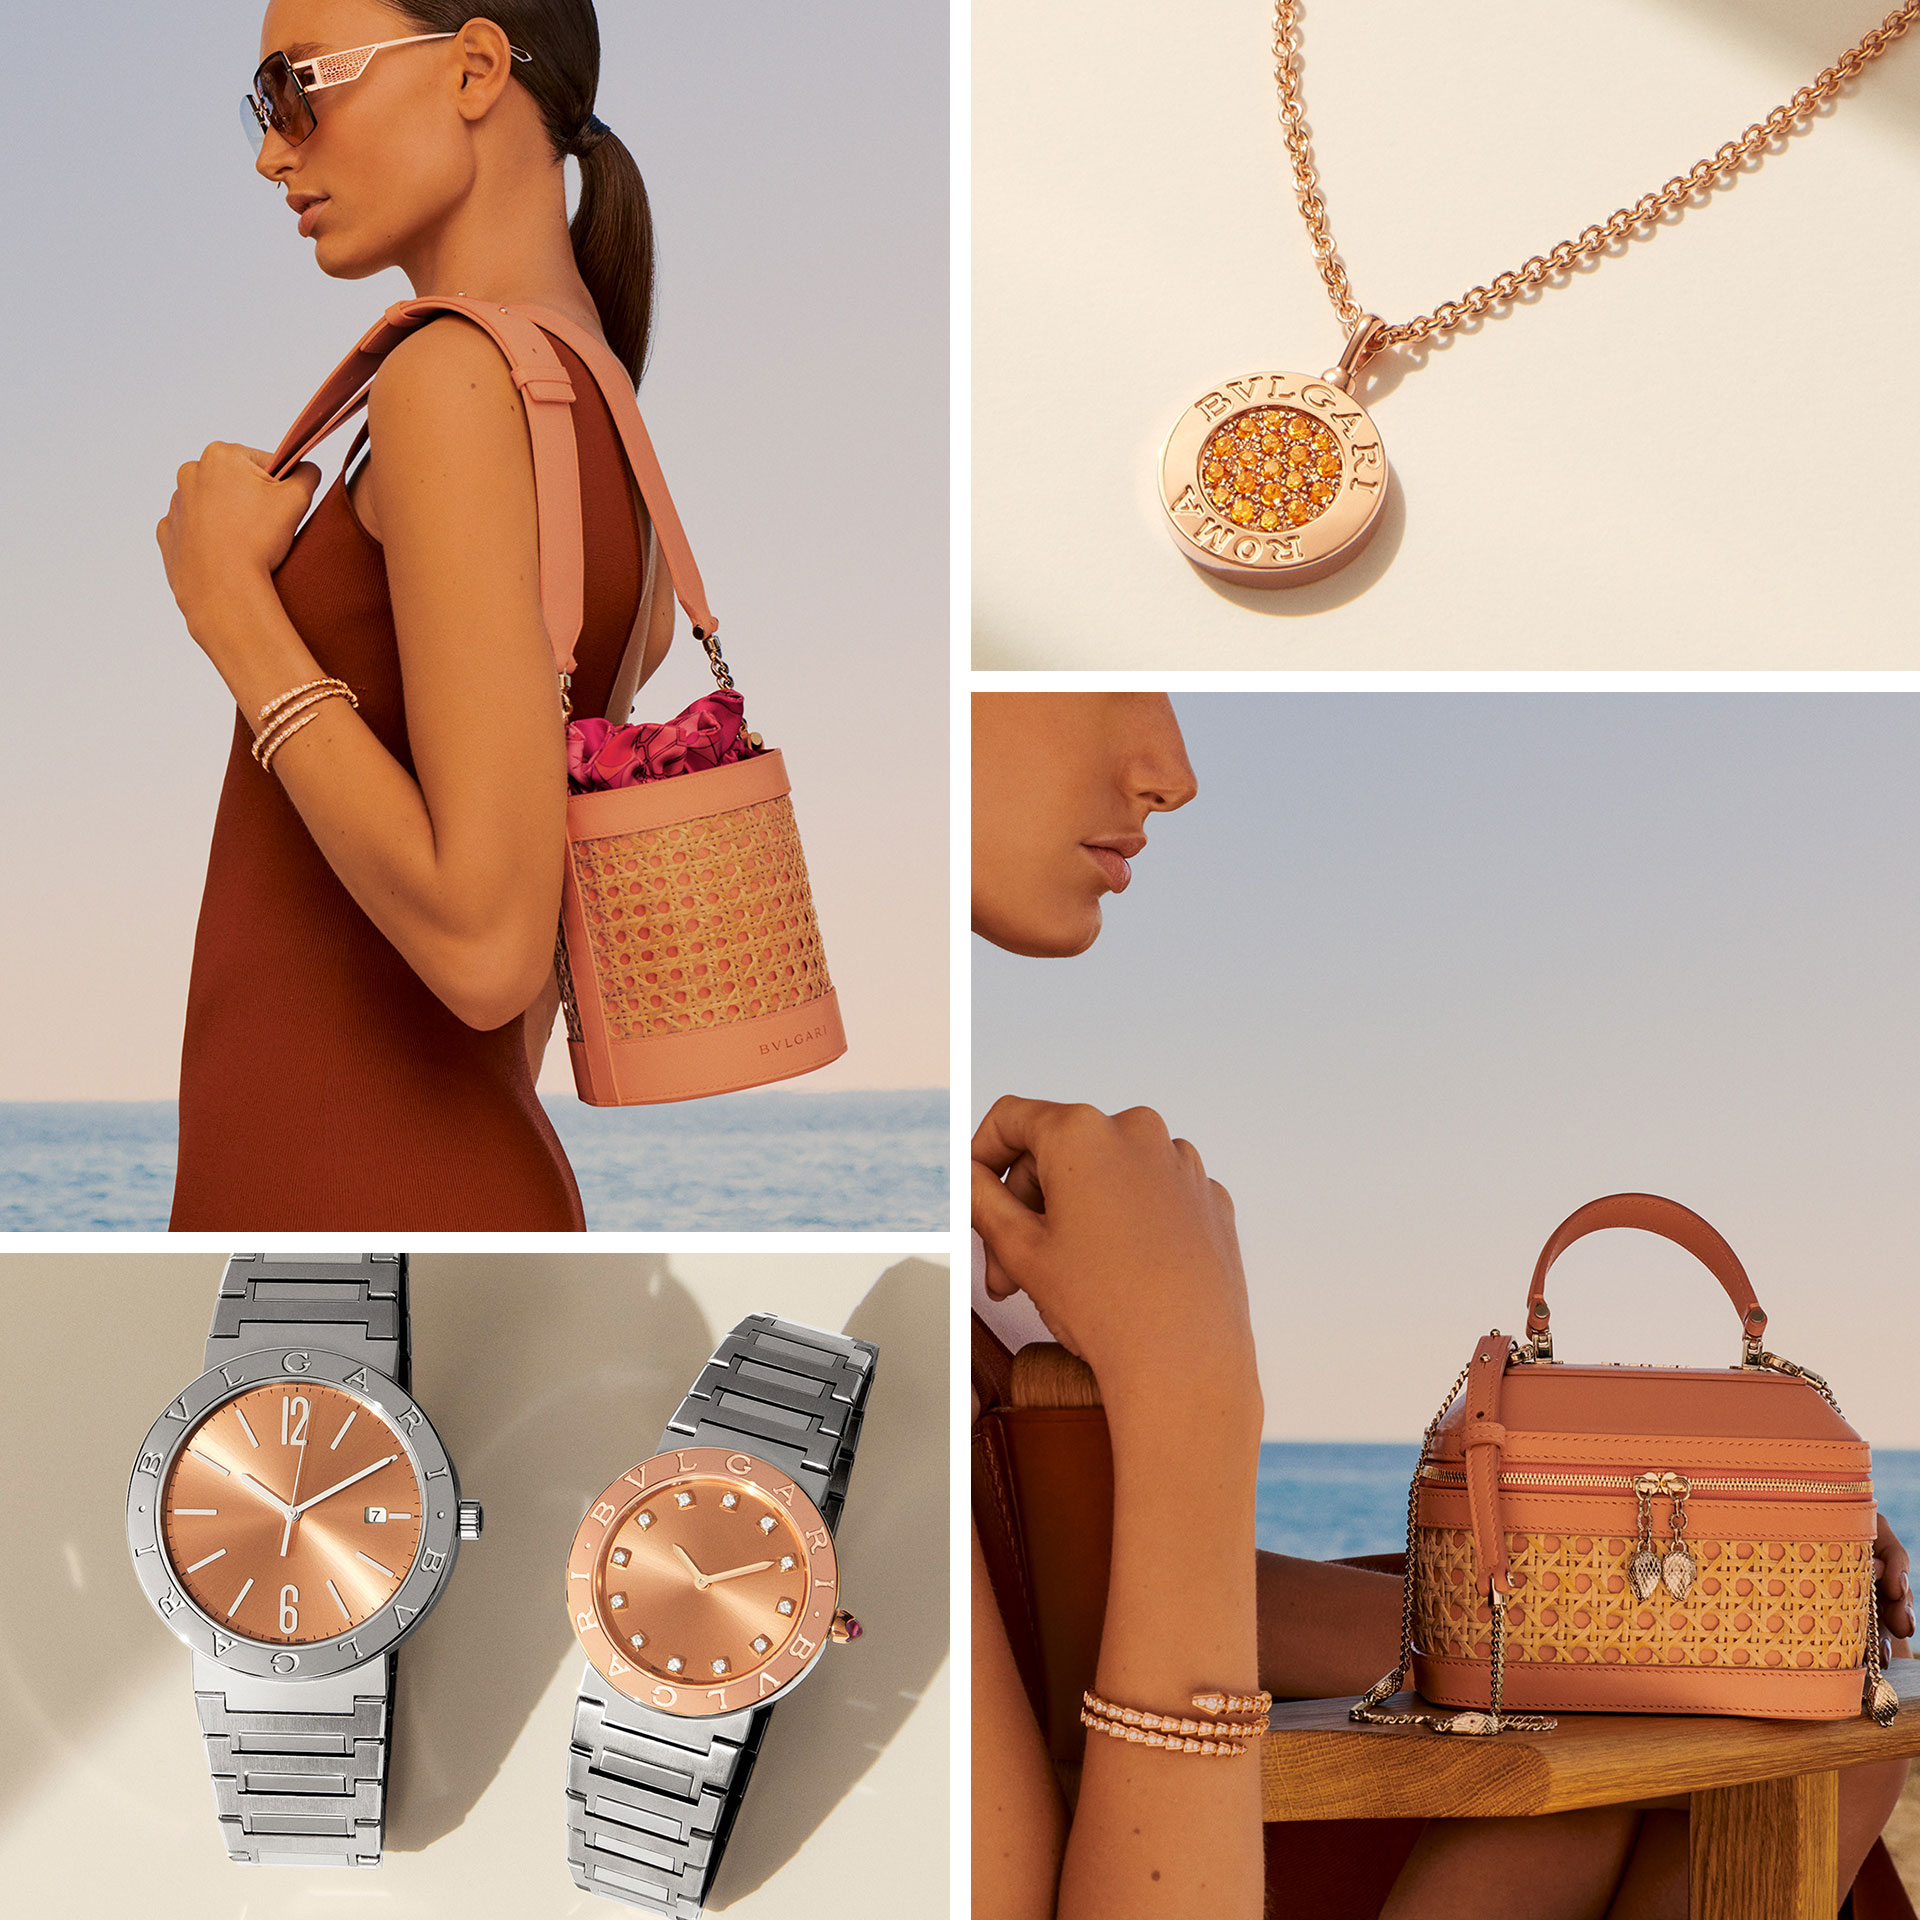 A moodboard representing the Resort collection.